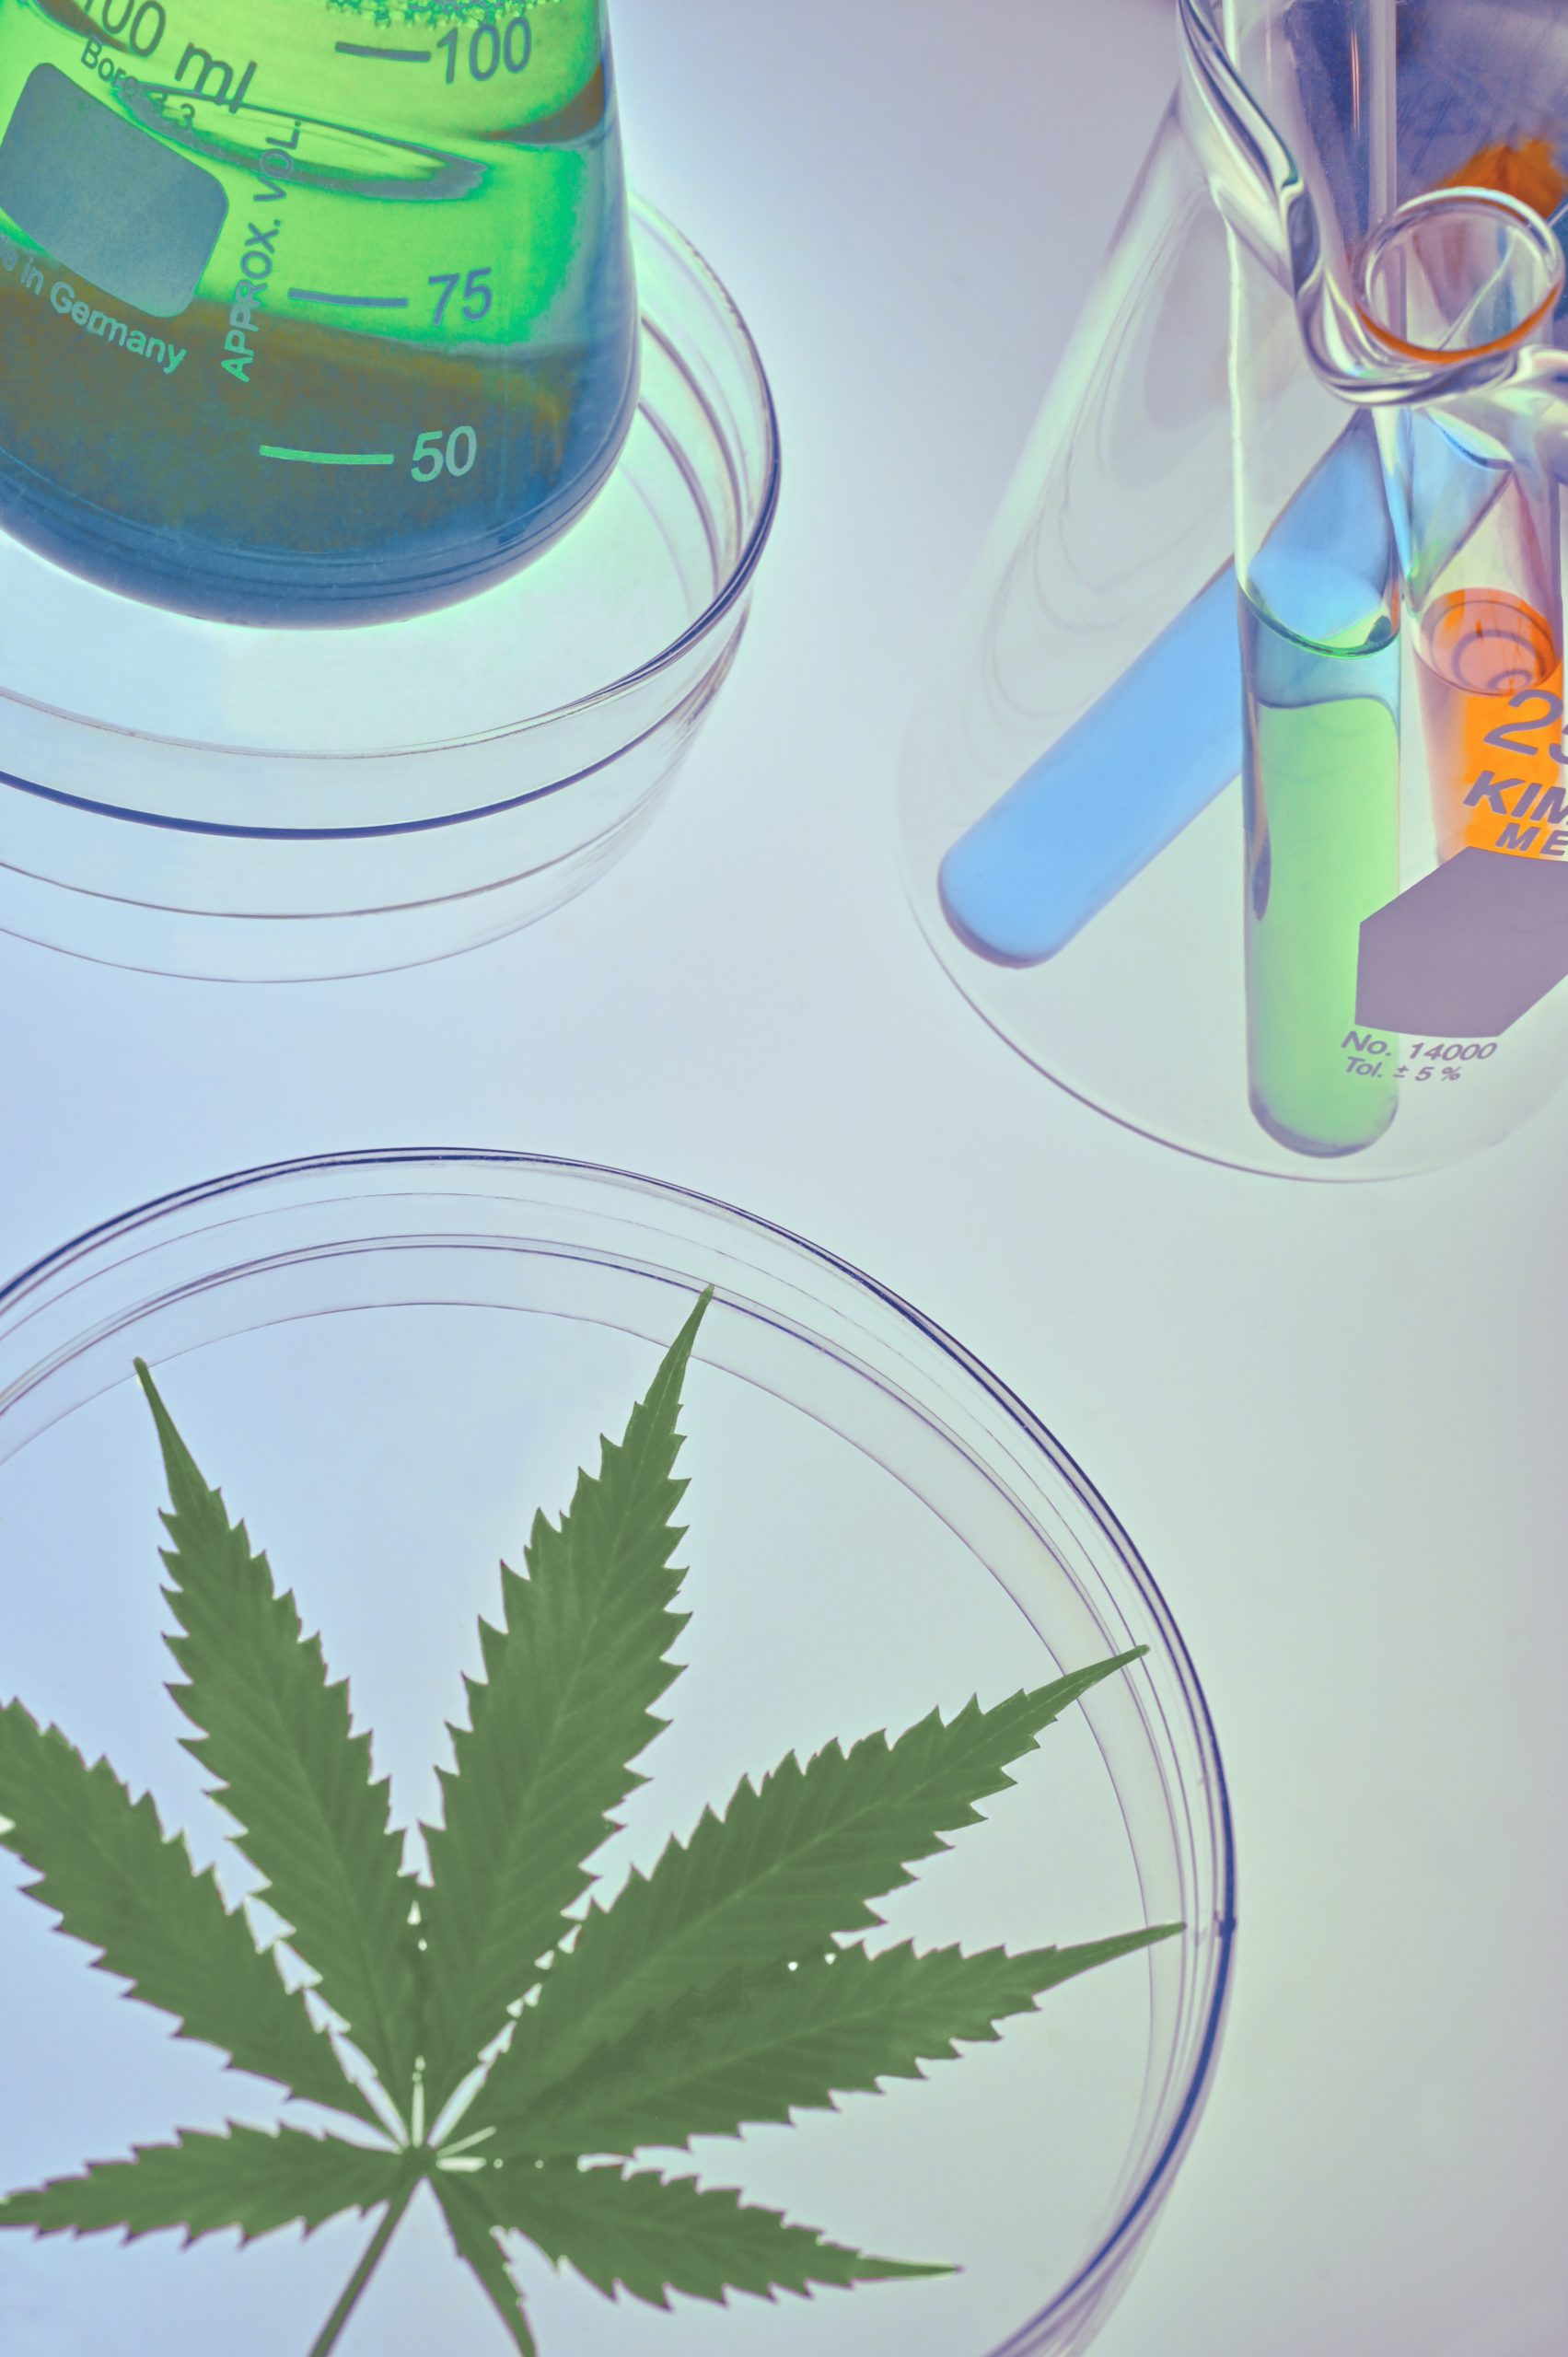 cannabis leaf in a dish next to beakers